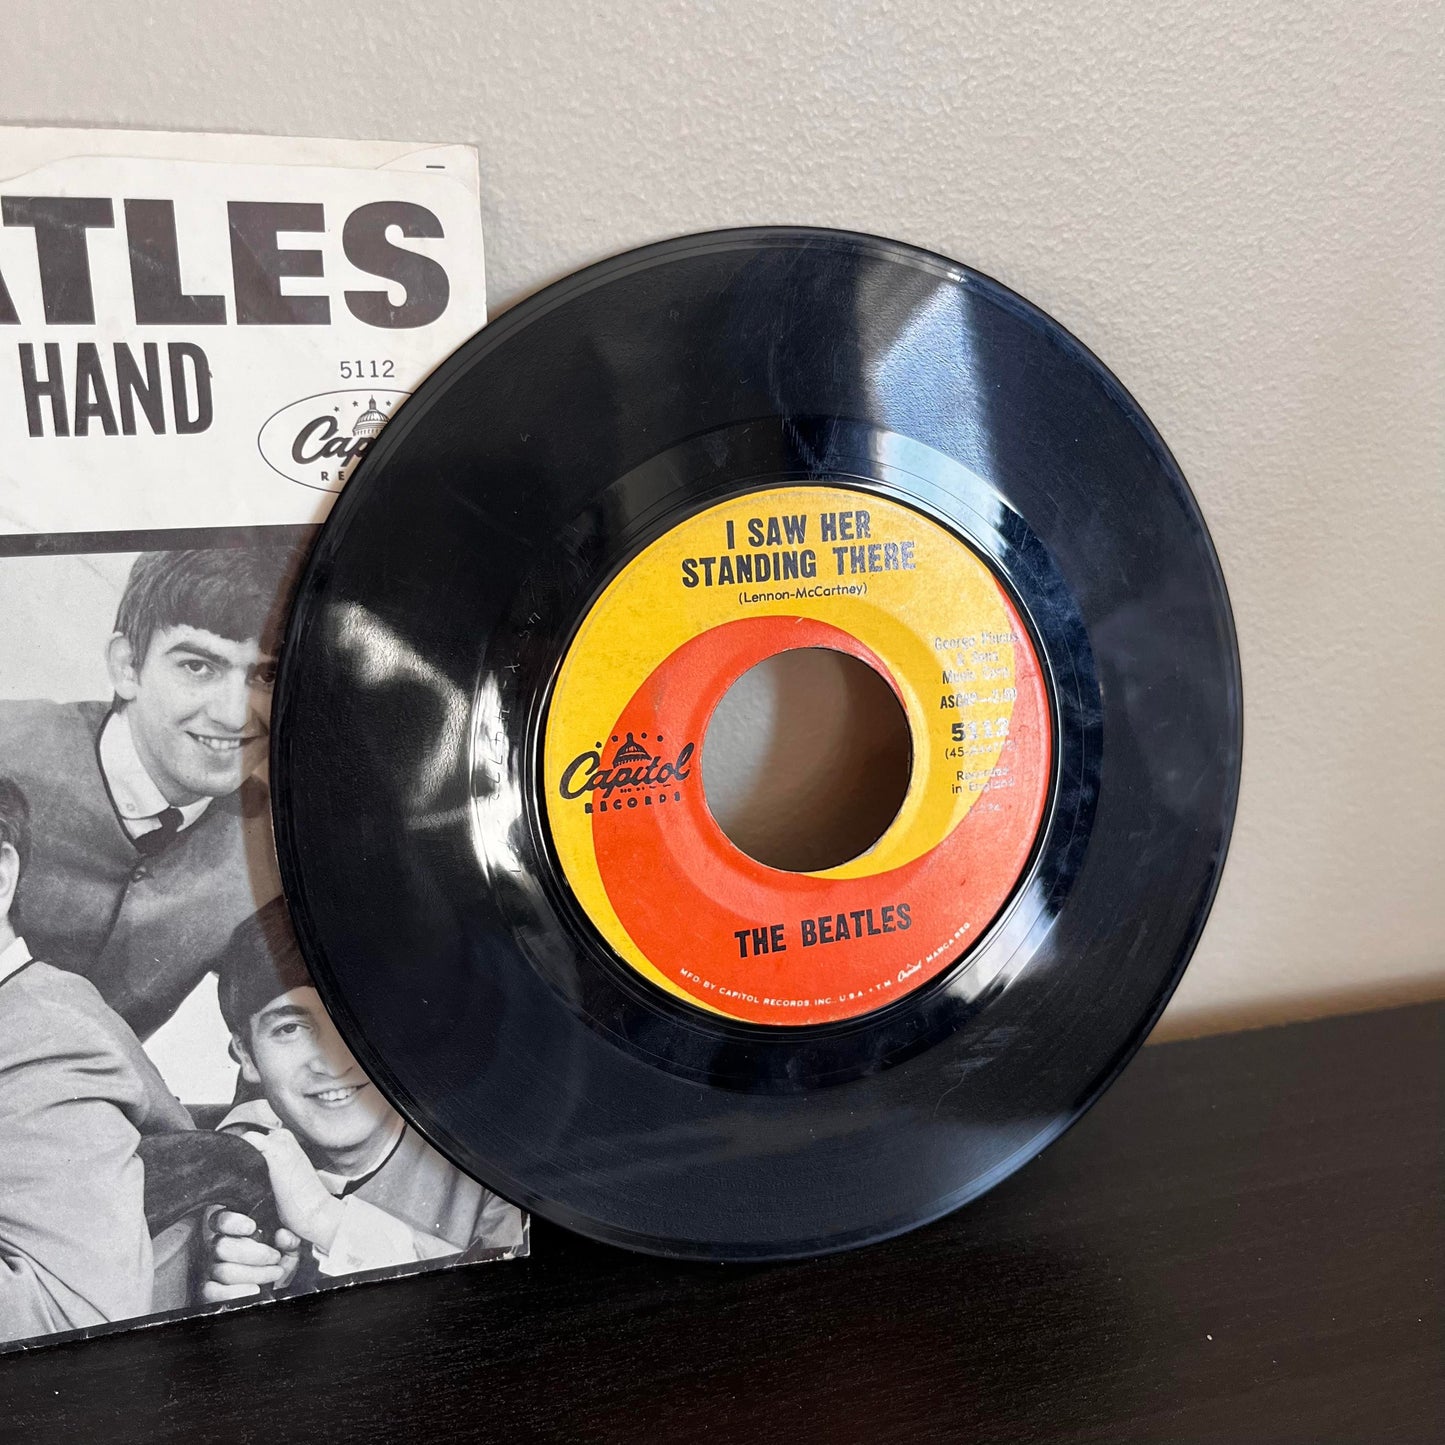 The Beatles I Want To Hold Your Hand/I Saw Her Standing There EX 7" 45RPM Vinyl Capitol 5112